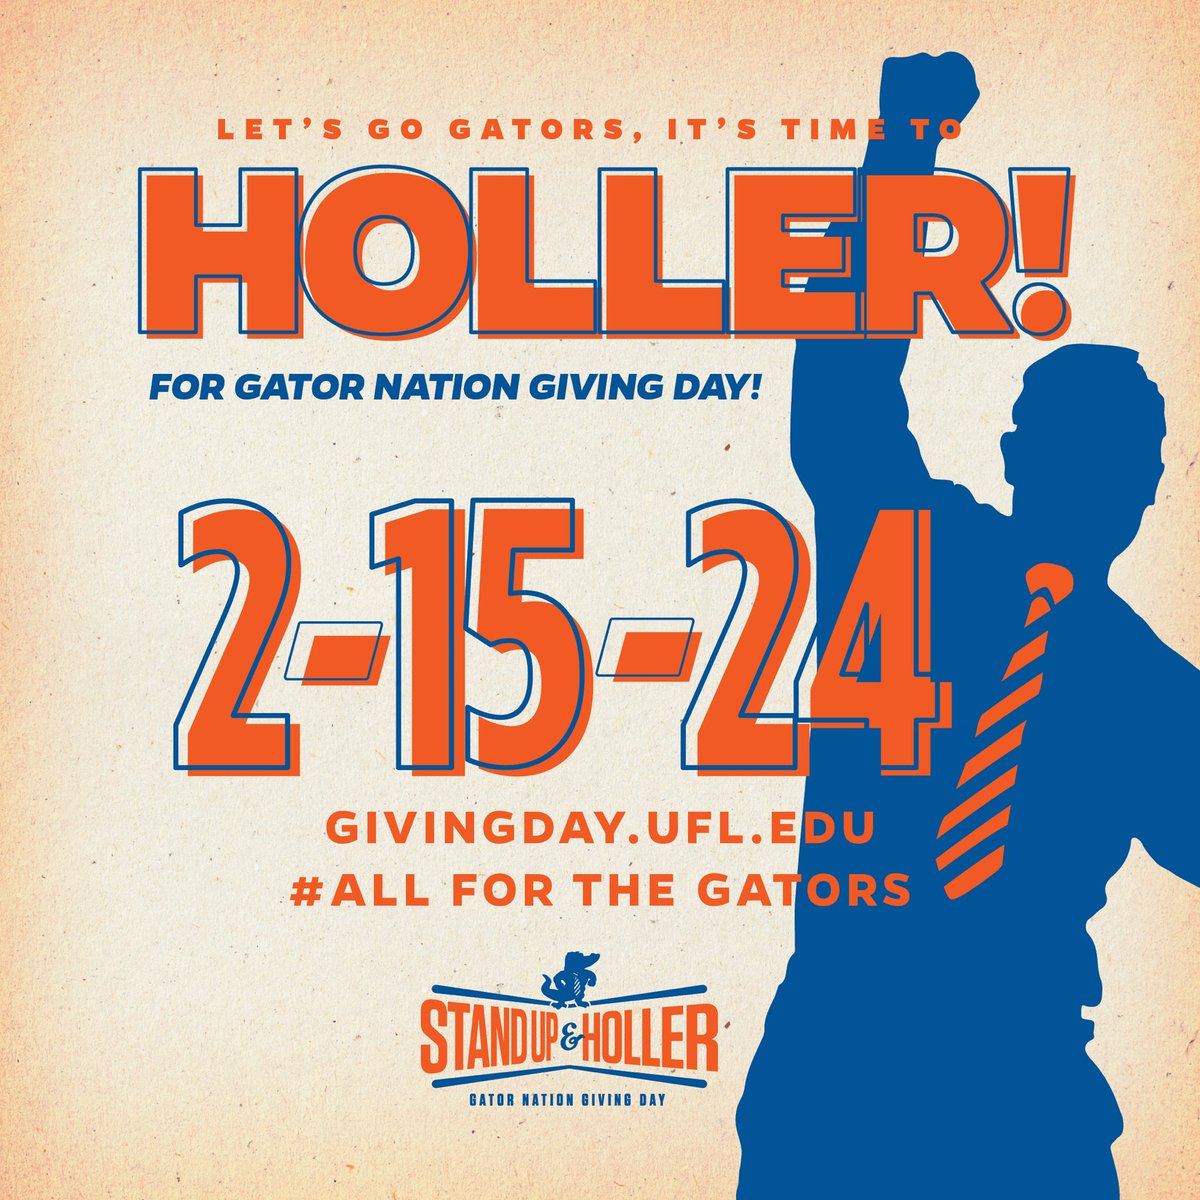 Save the date! Feb. 15 is Gator Nation Giving Day! Help @UFChemistry hit our challenge of 75 gifts on Feb. 15 to receive an additional $20K gift. Last year, we received over $102K in generous donations! Let’s try to top that in 2024 to support our students and science